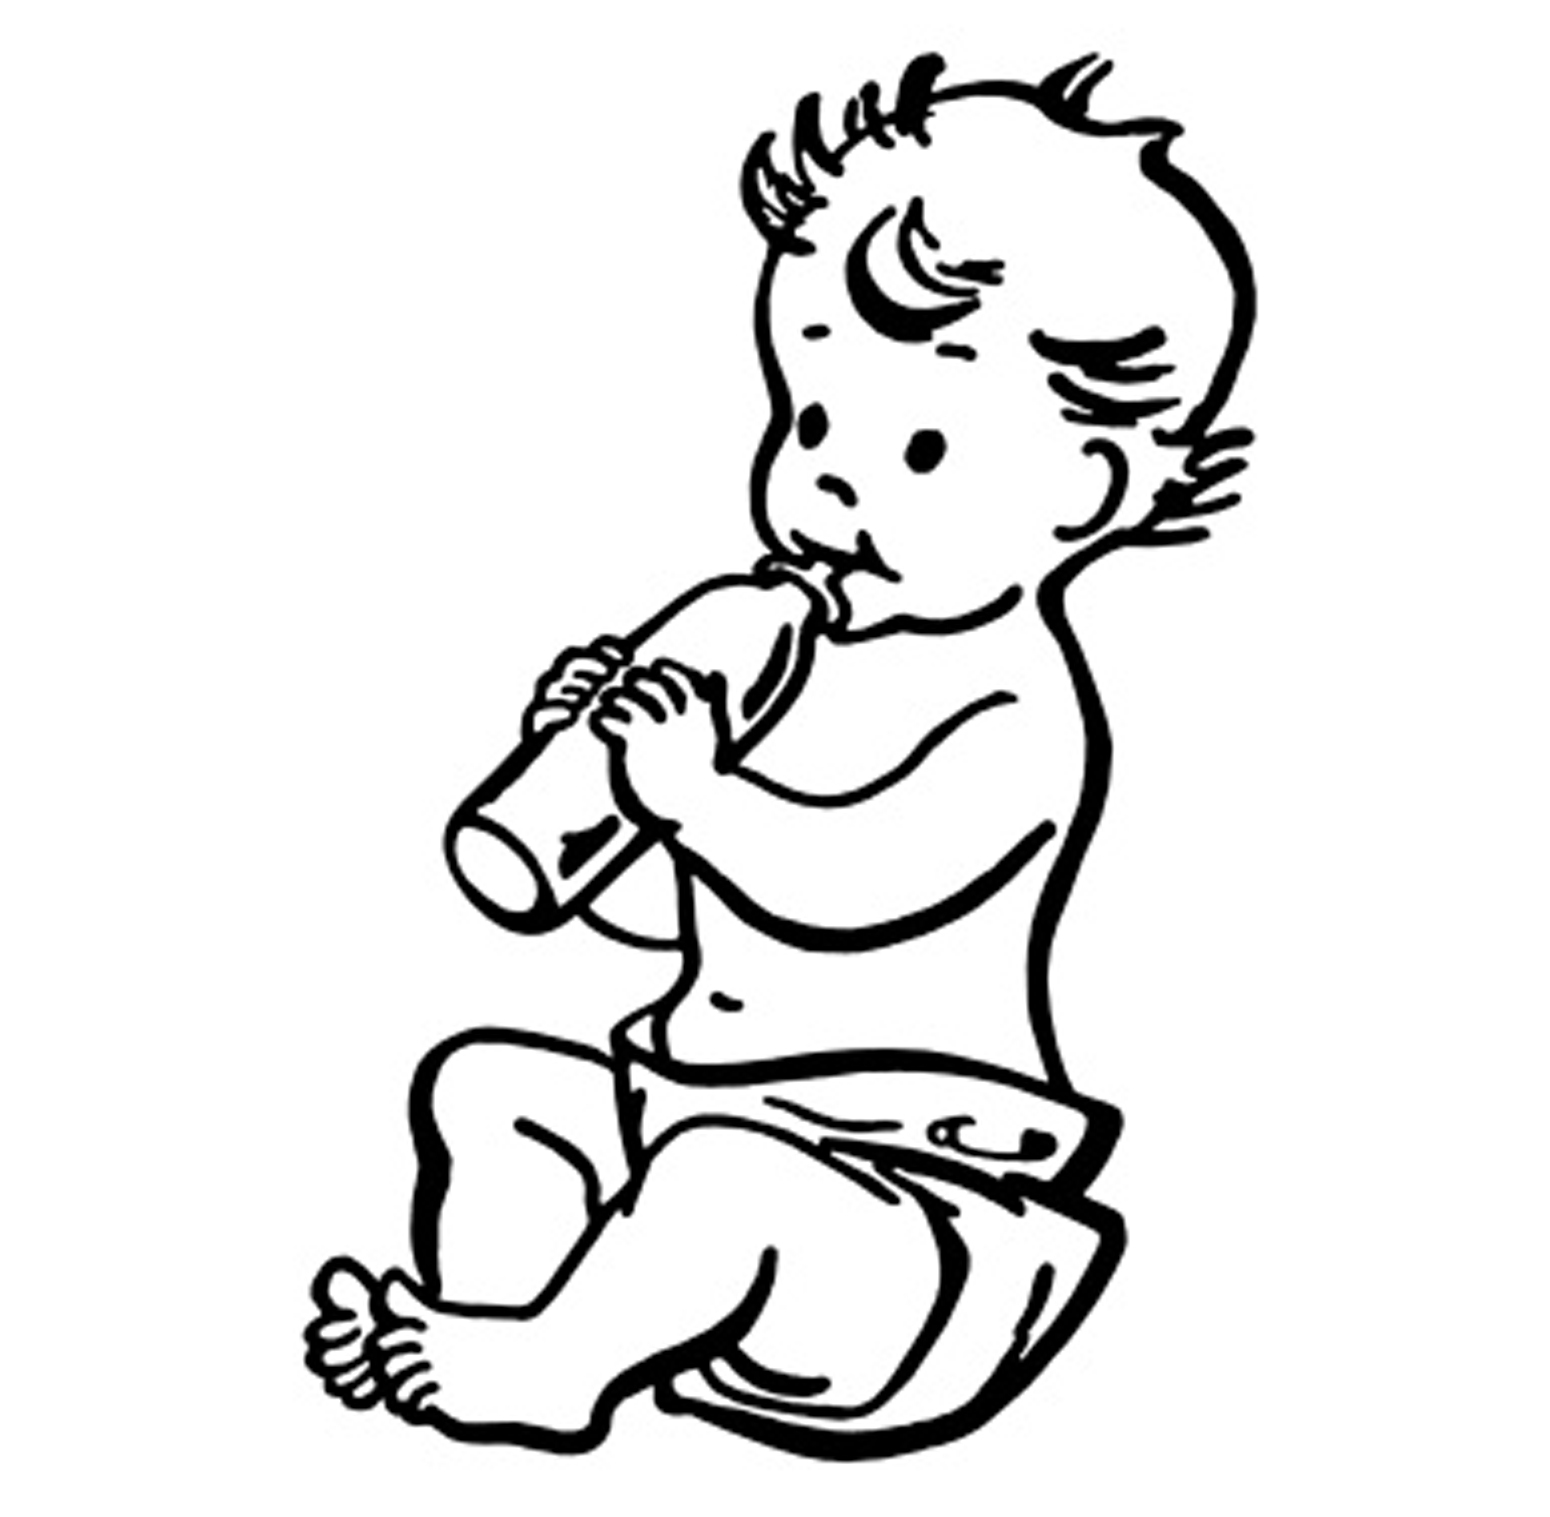 baby shower clip art black and white - photo #20